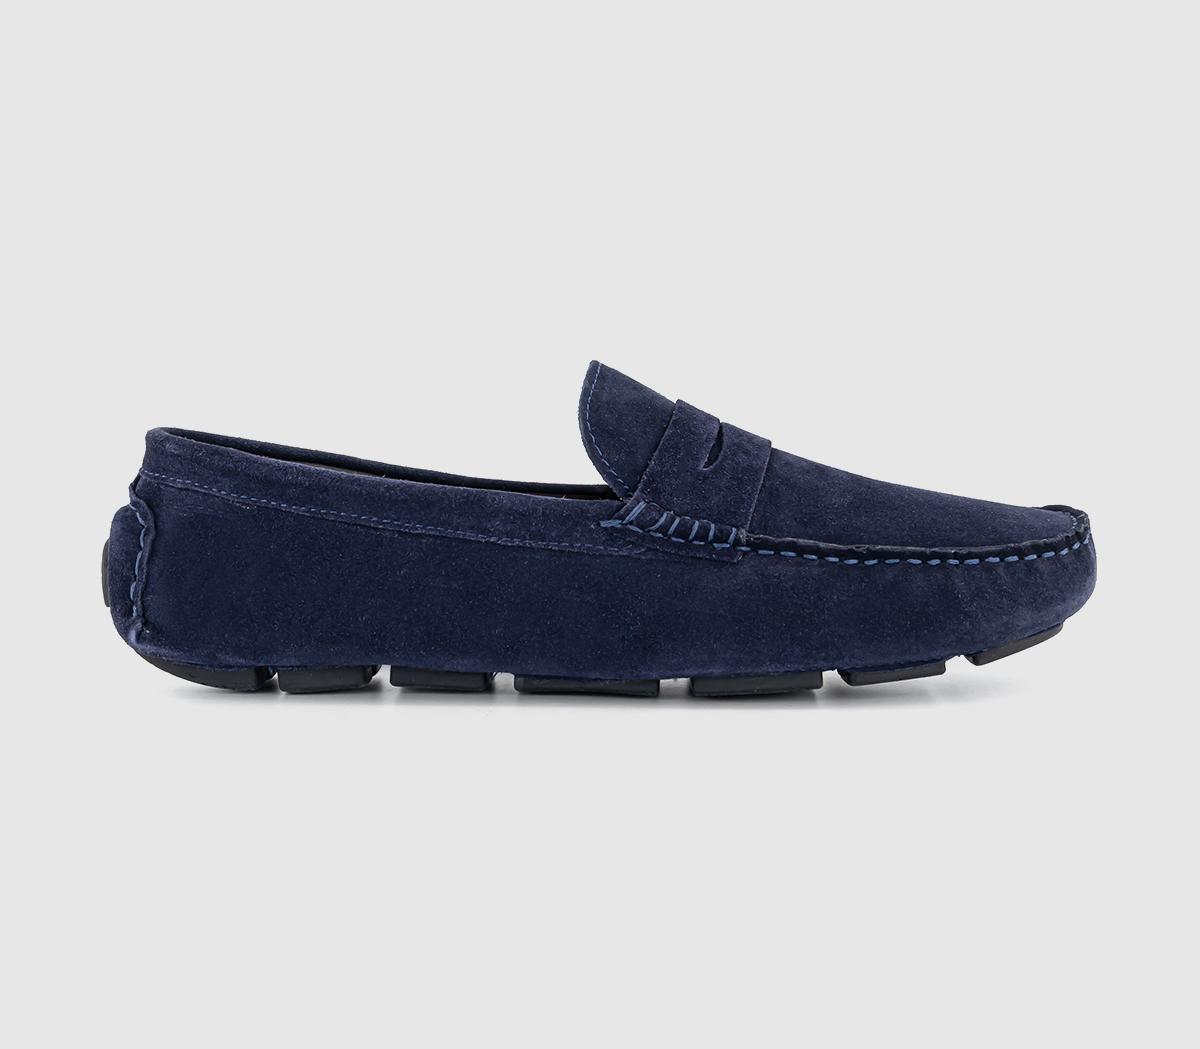 OFFICECliveden Suede Driving ShoesNavy Suede